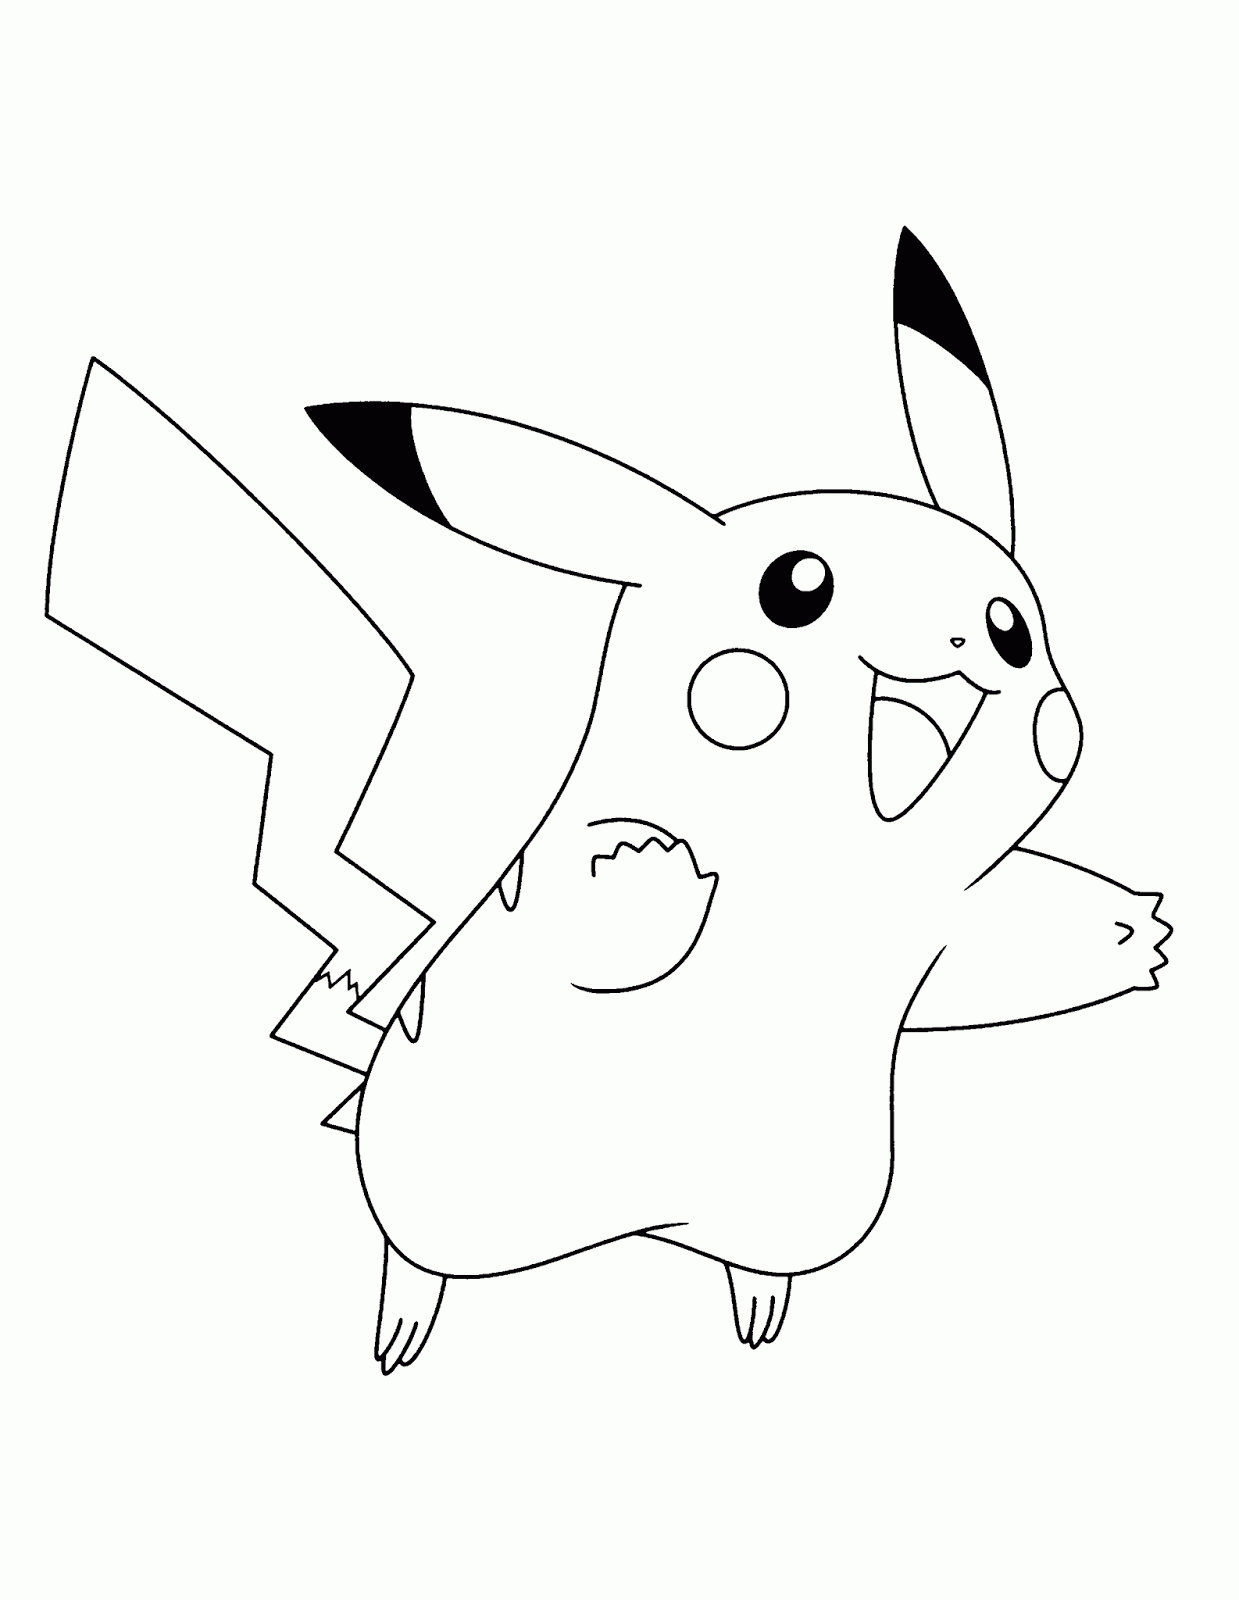 The Holiday Site Coloring Pages of Pokemon Free and Downloadable